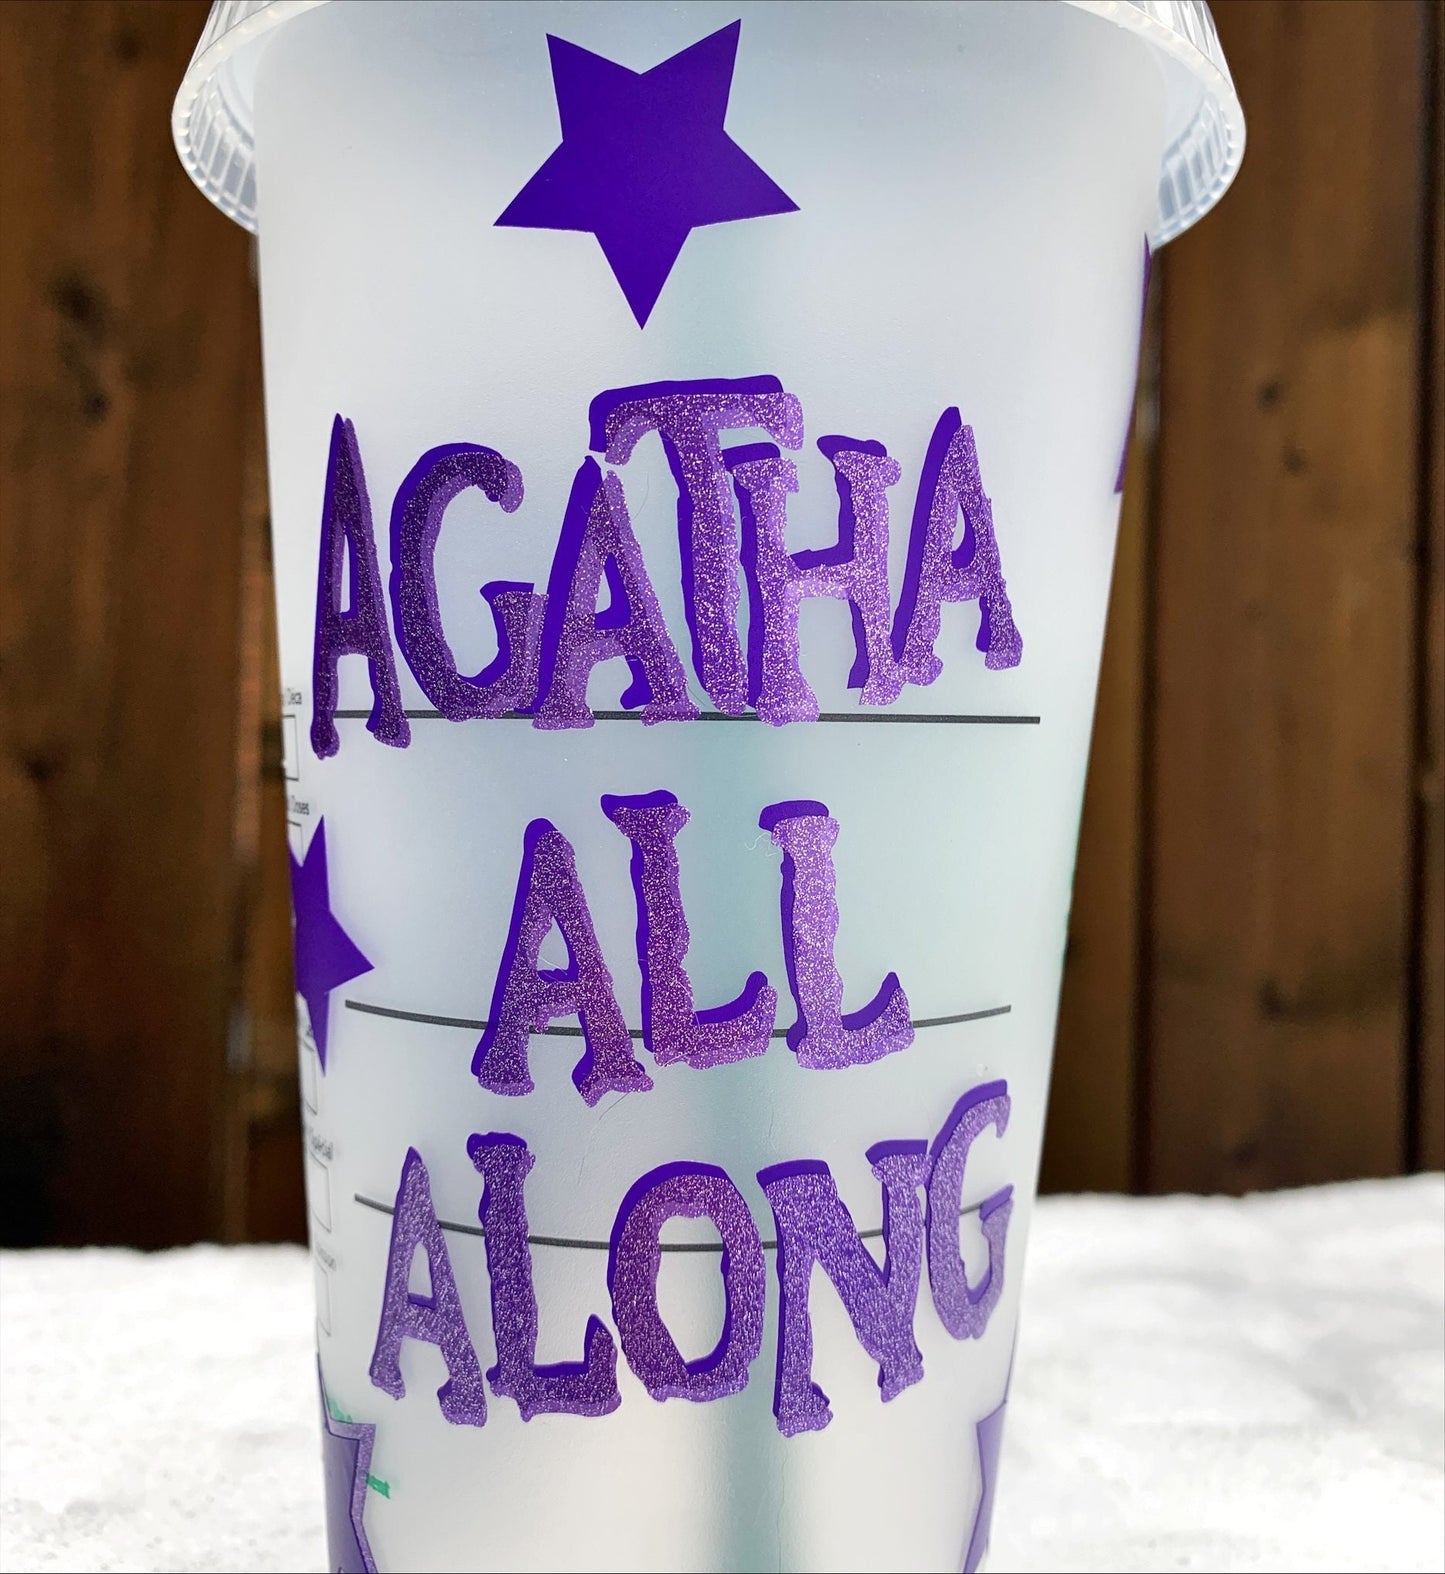 All Along Cup